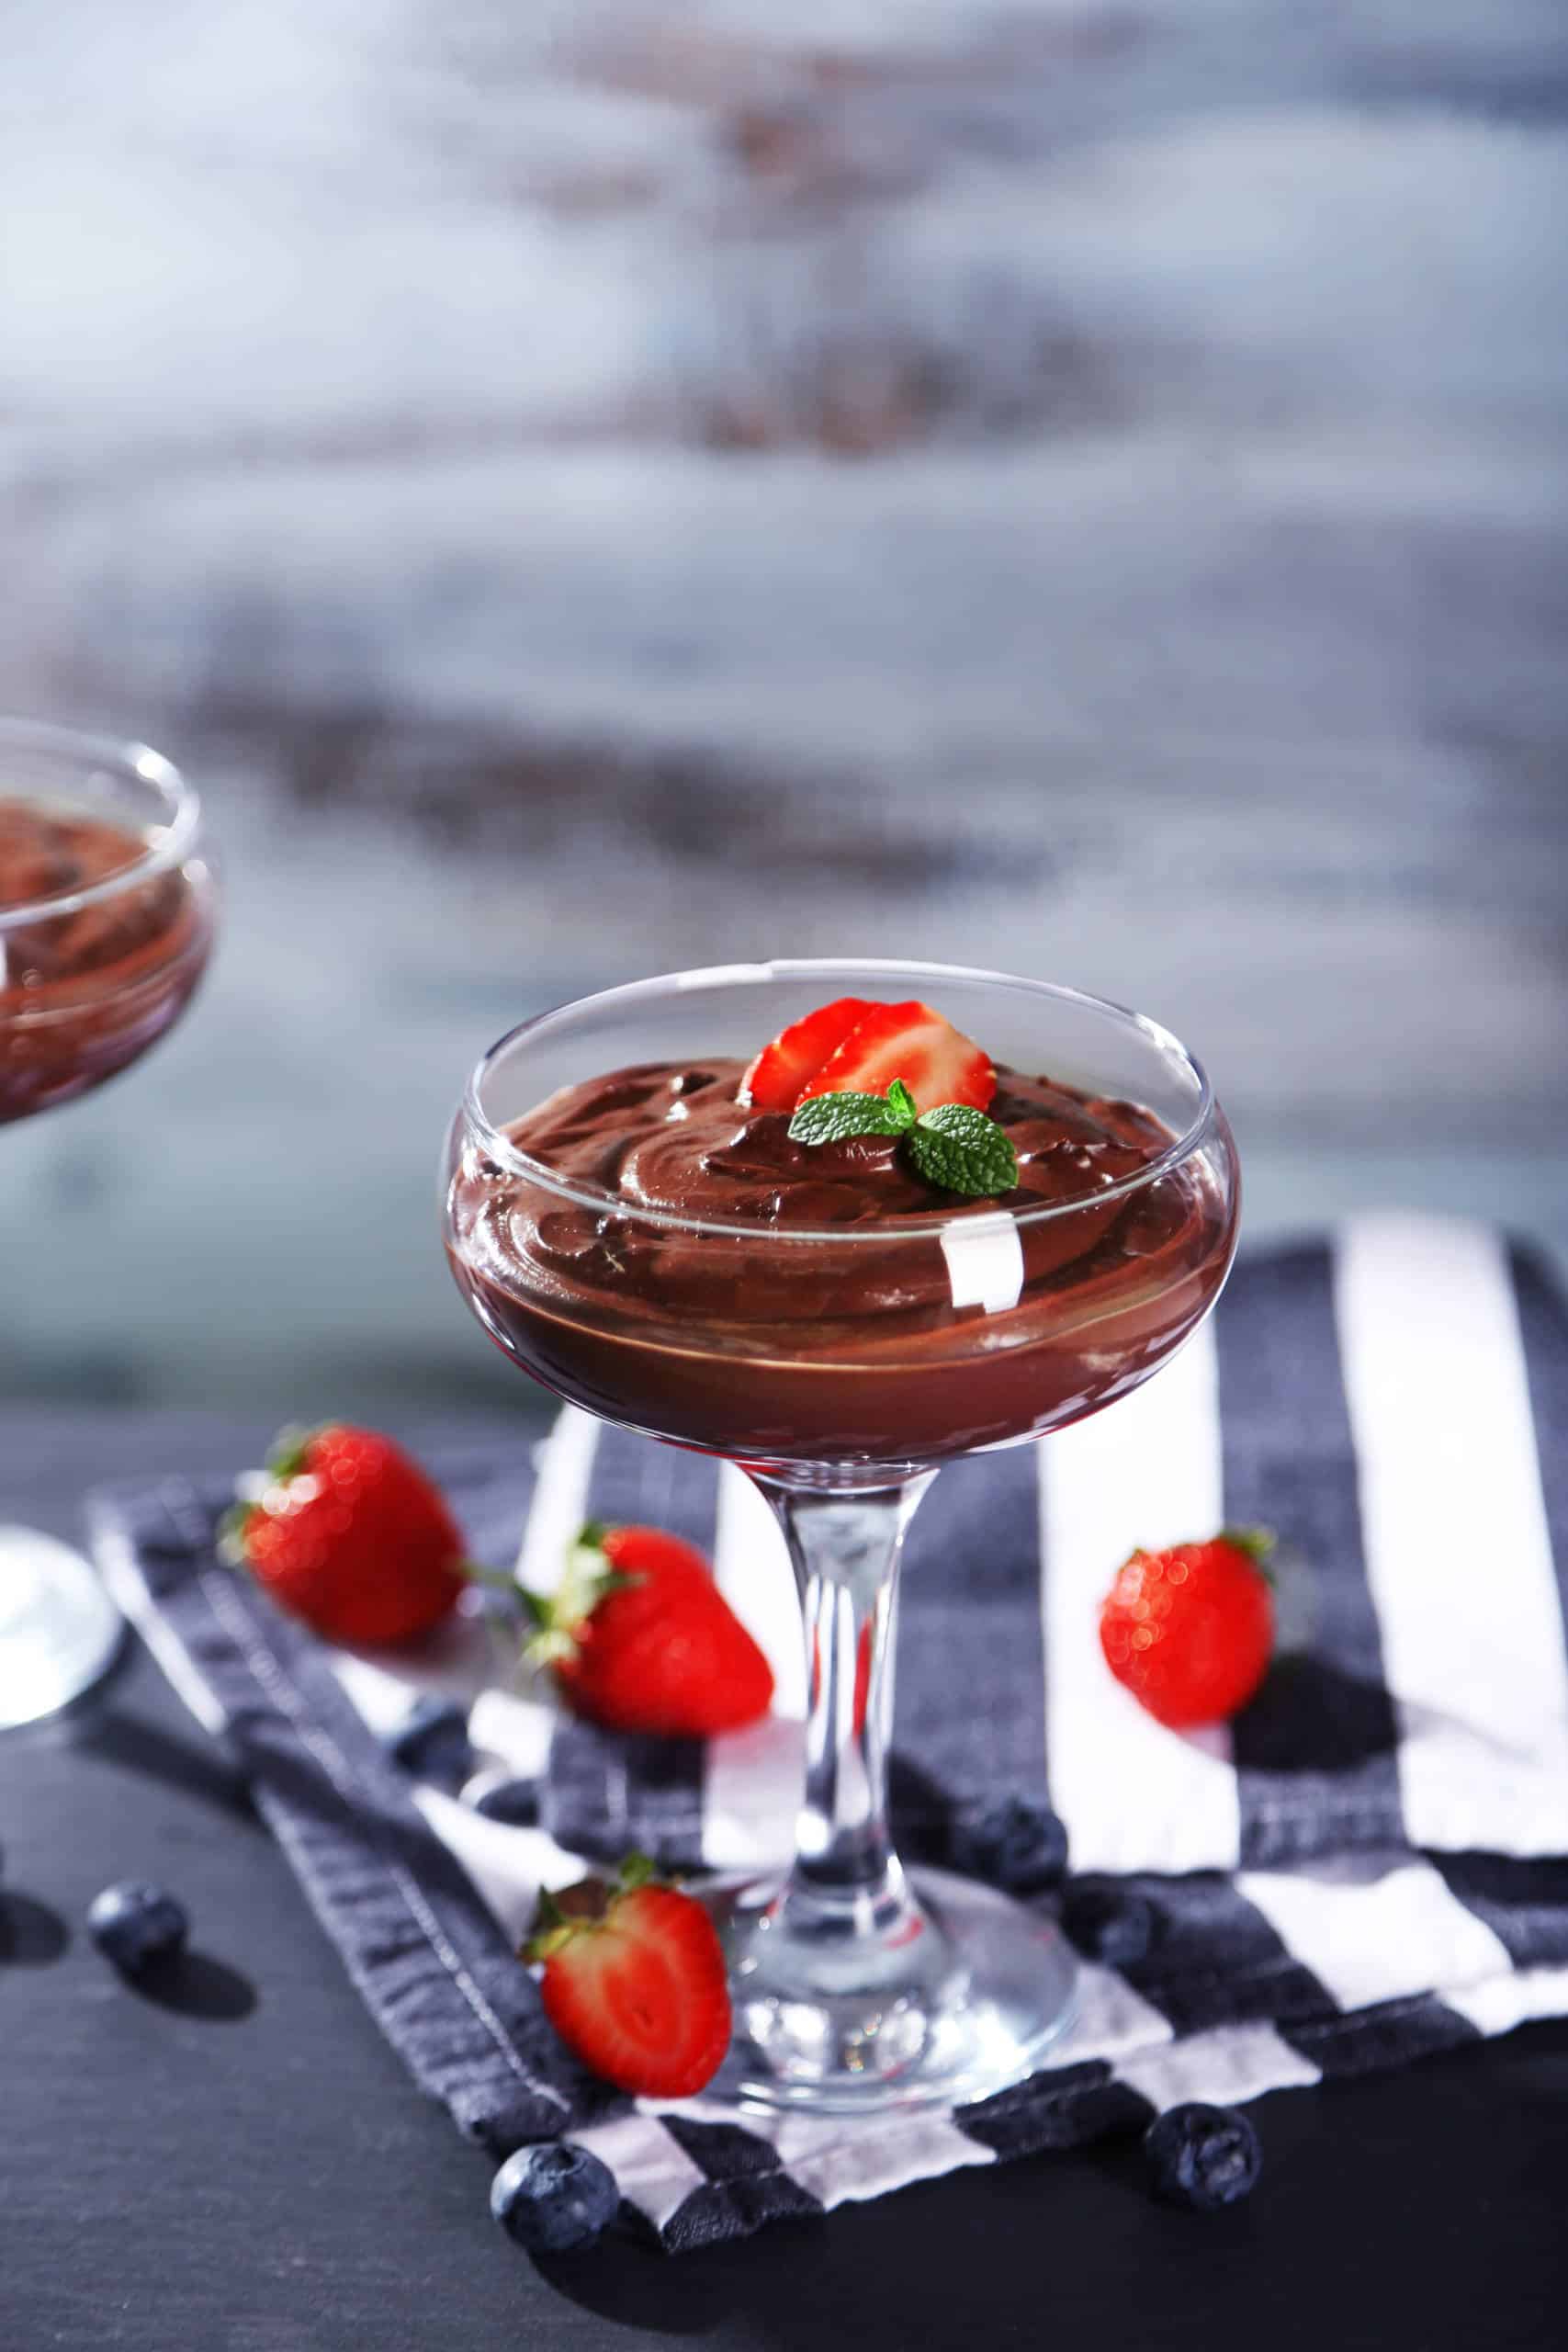 Recipe: Healthy Strawberry Chocolate mousse